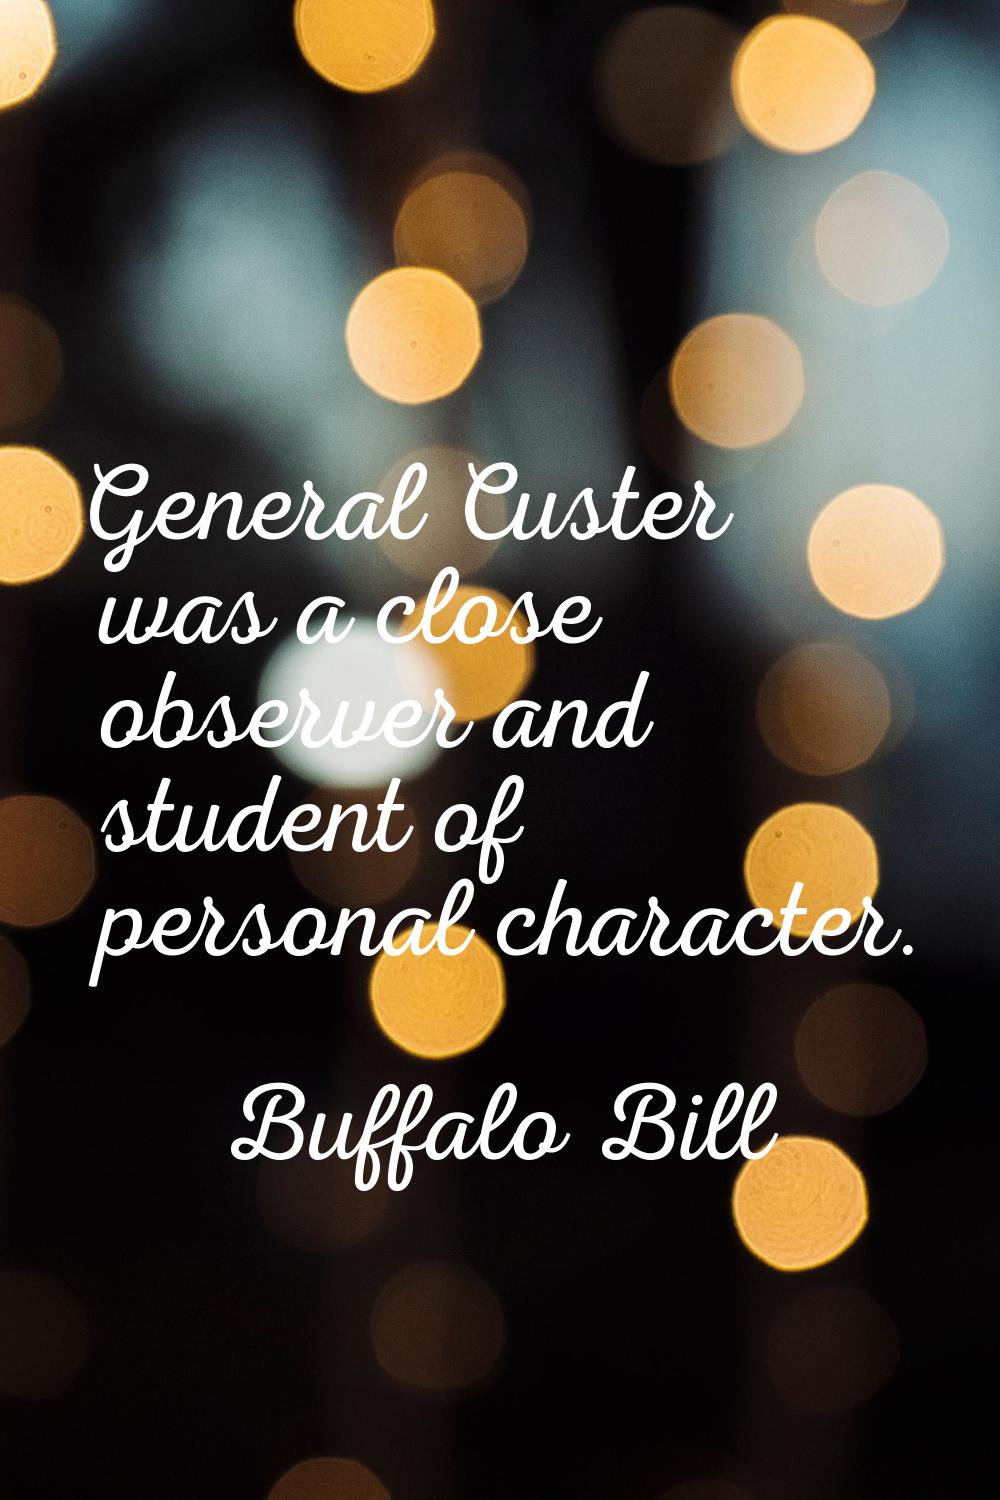 General Custer was a close observer and student of personal character.